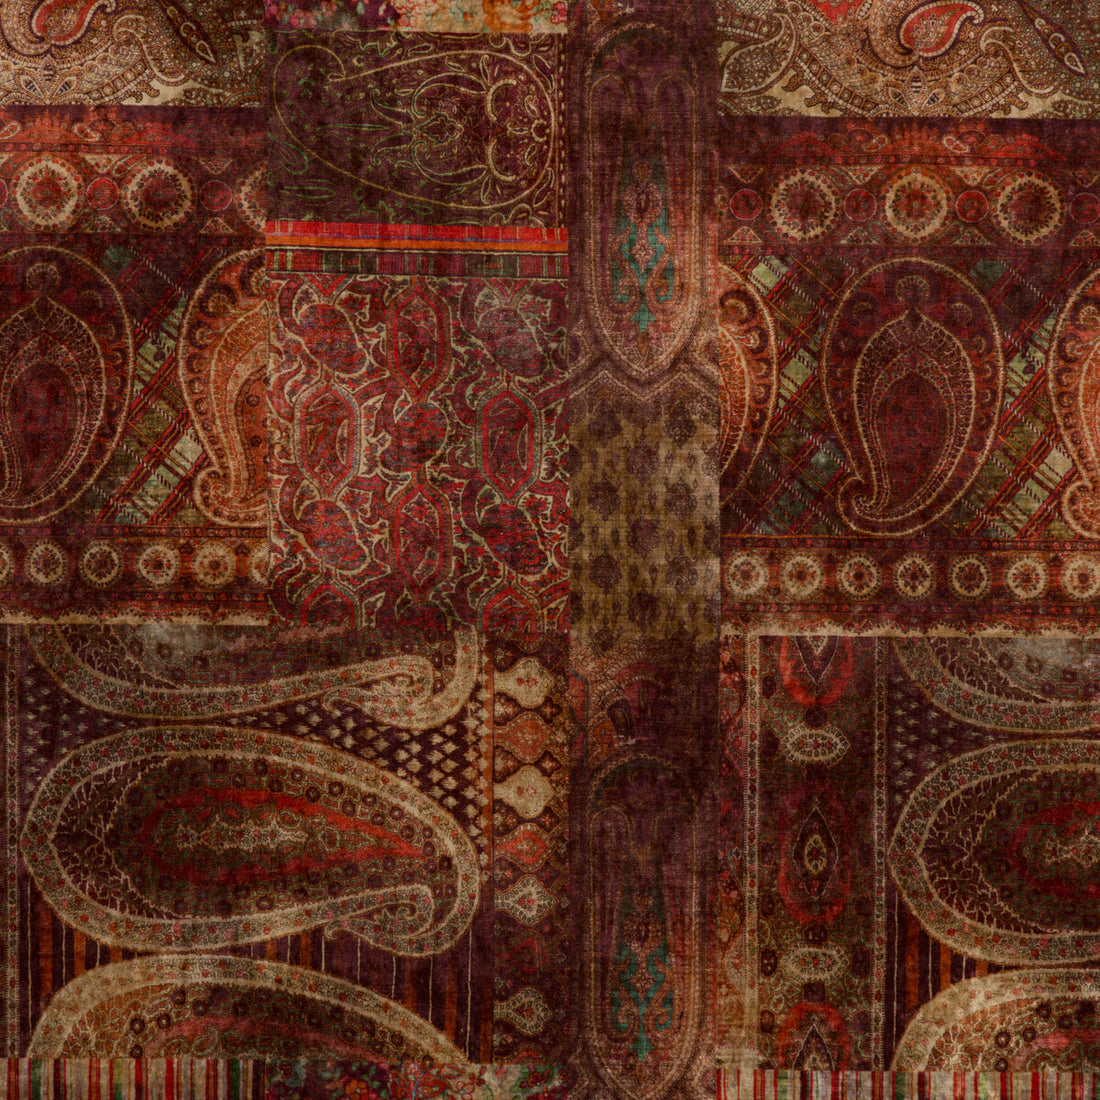 Lomond Velvet fabric in red/plum color - pattern FD265.V106.0 - by Mulberry in the Bohemian Romance collection